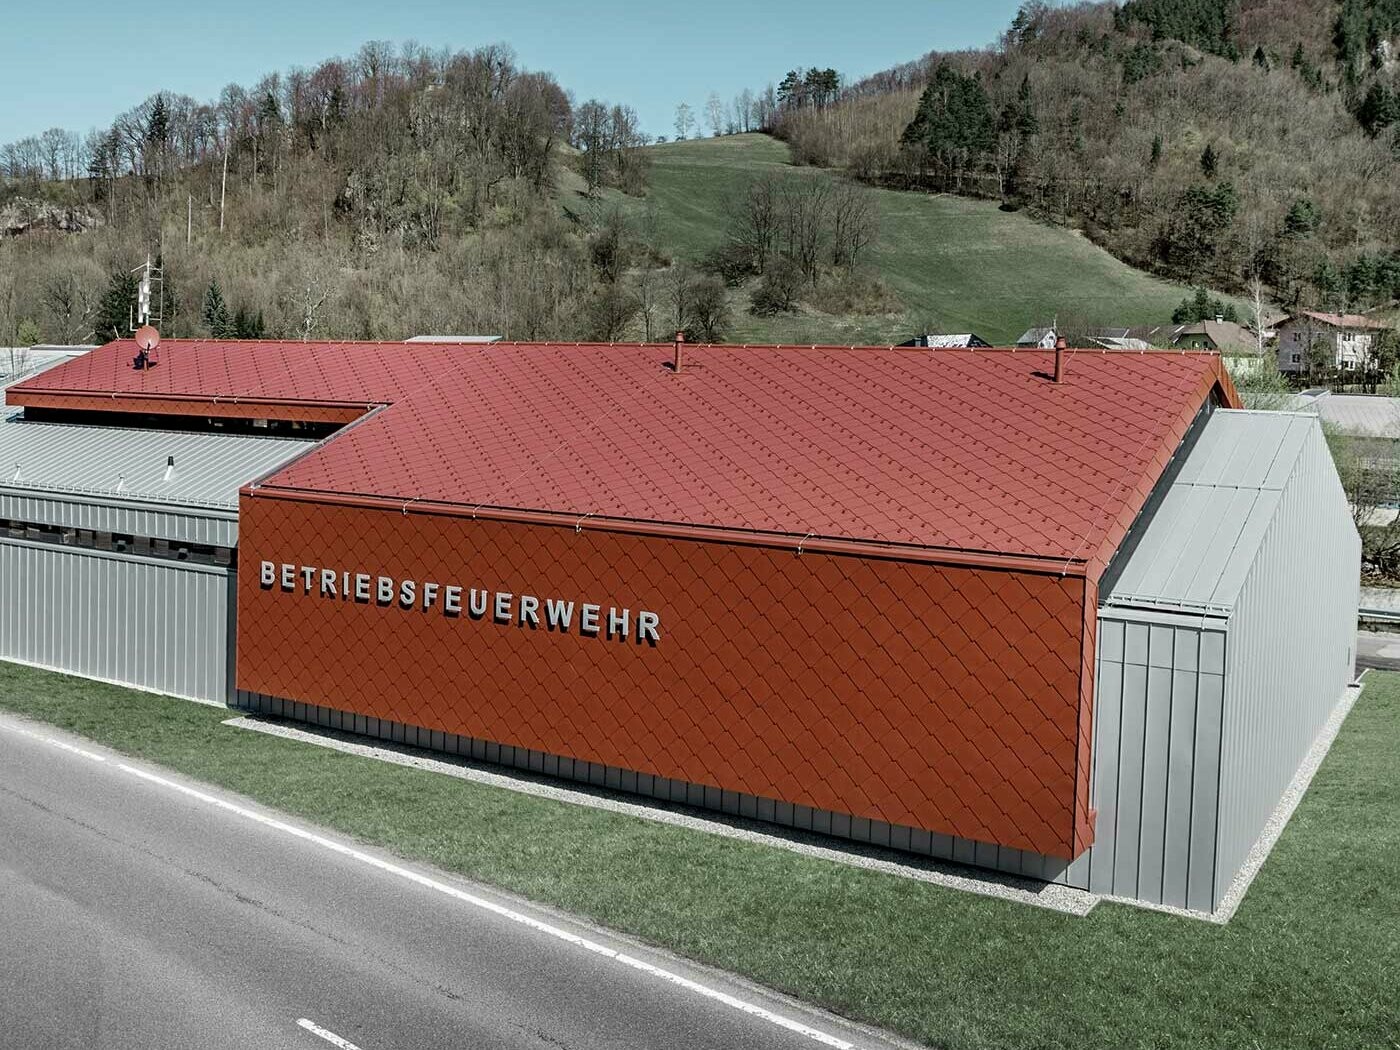 The new fire station for PREFA and Neuman Aluminium’s own fire brigade was clad with the new 44 × 44 rhomboid roof and wall tiles in P.10 oxide red and Prefalz in metallic silver.